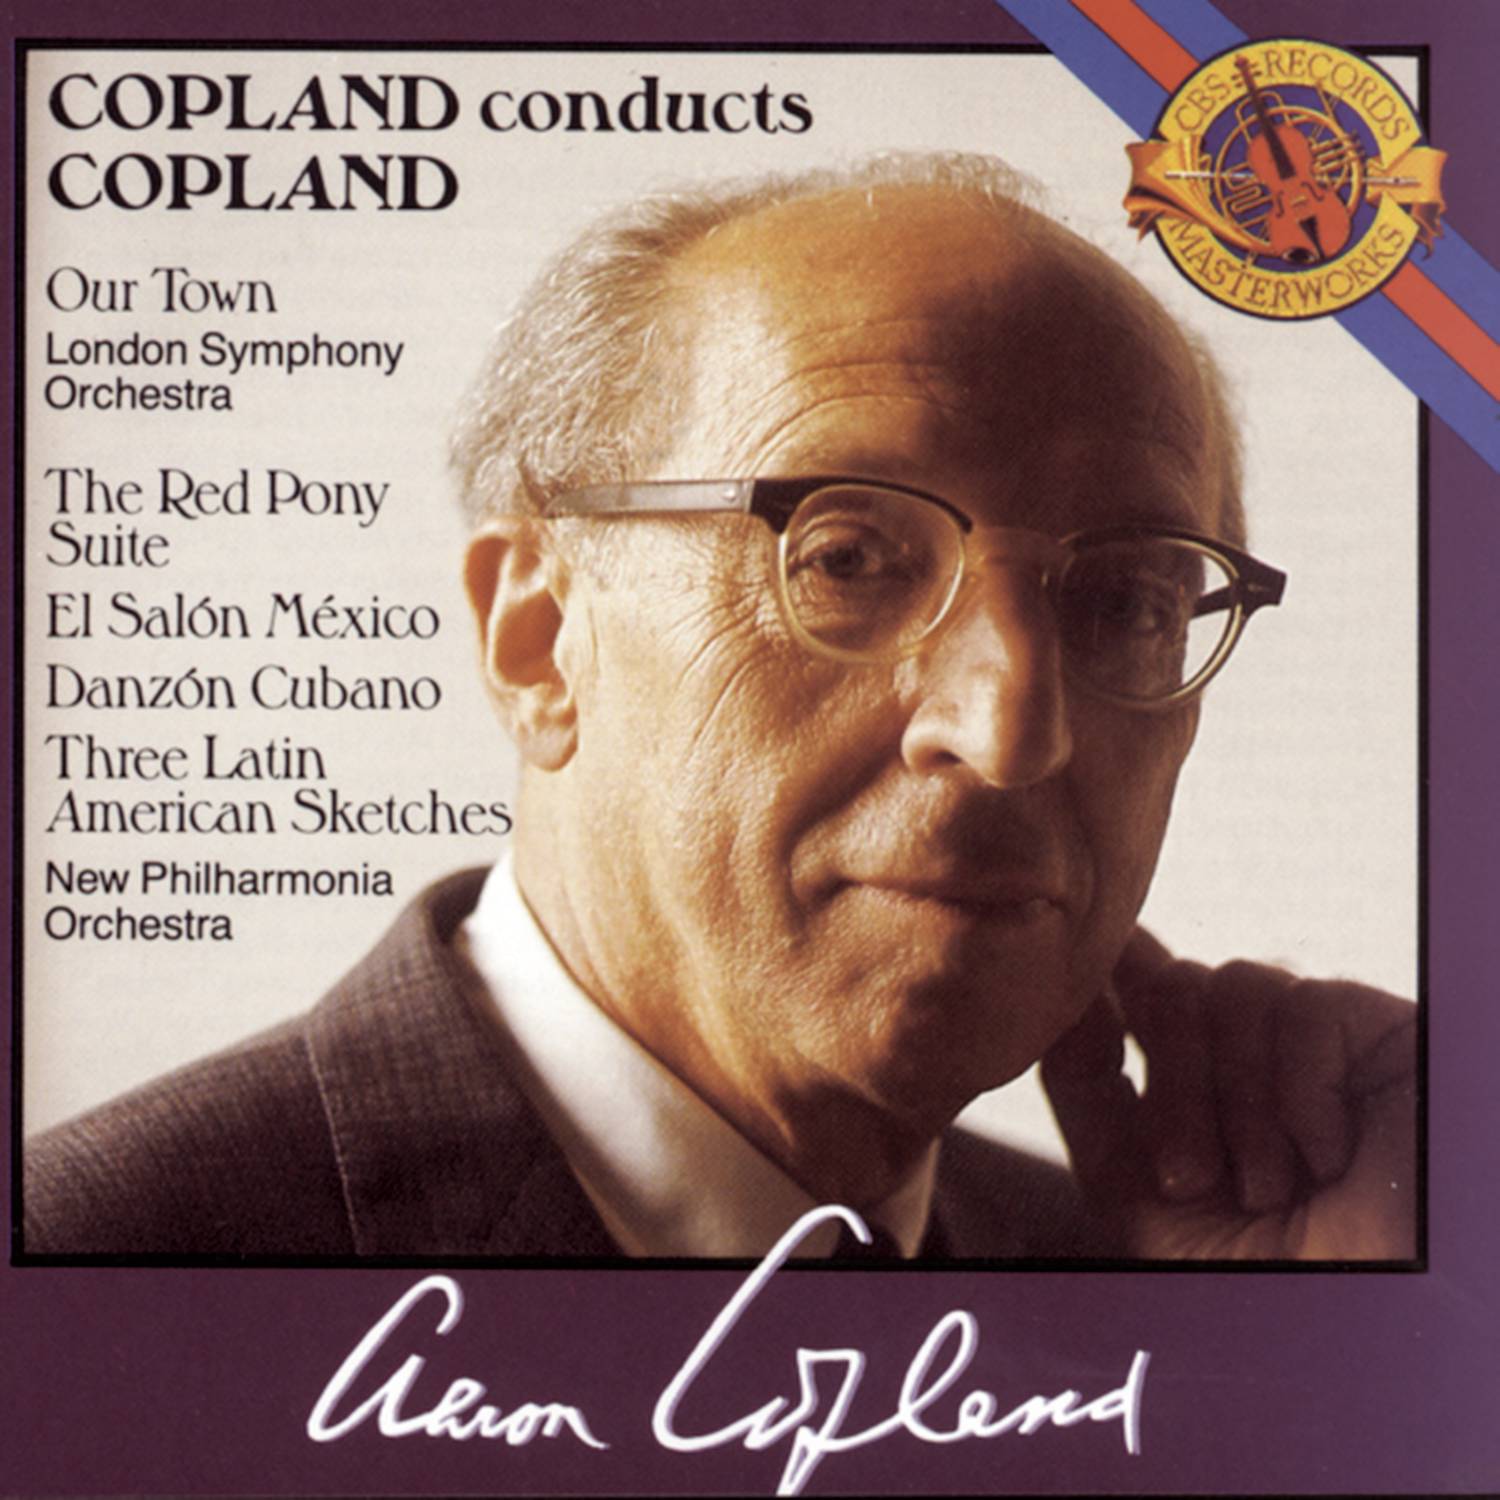 Copland: Our Town, The Red Pony, El Salon Mexico